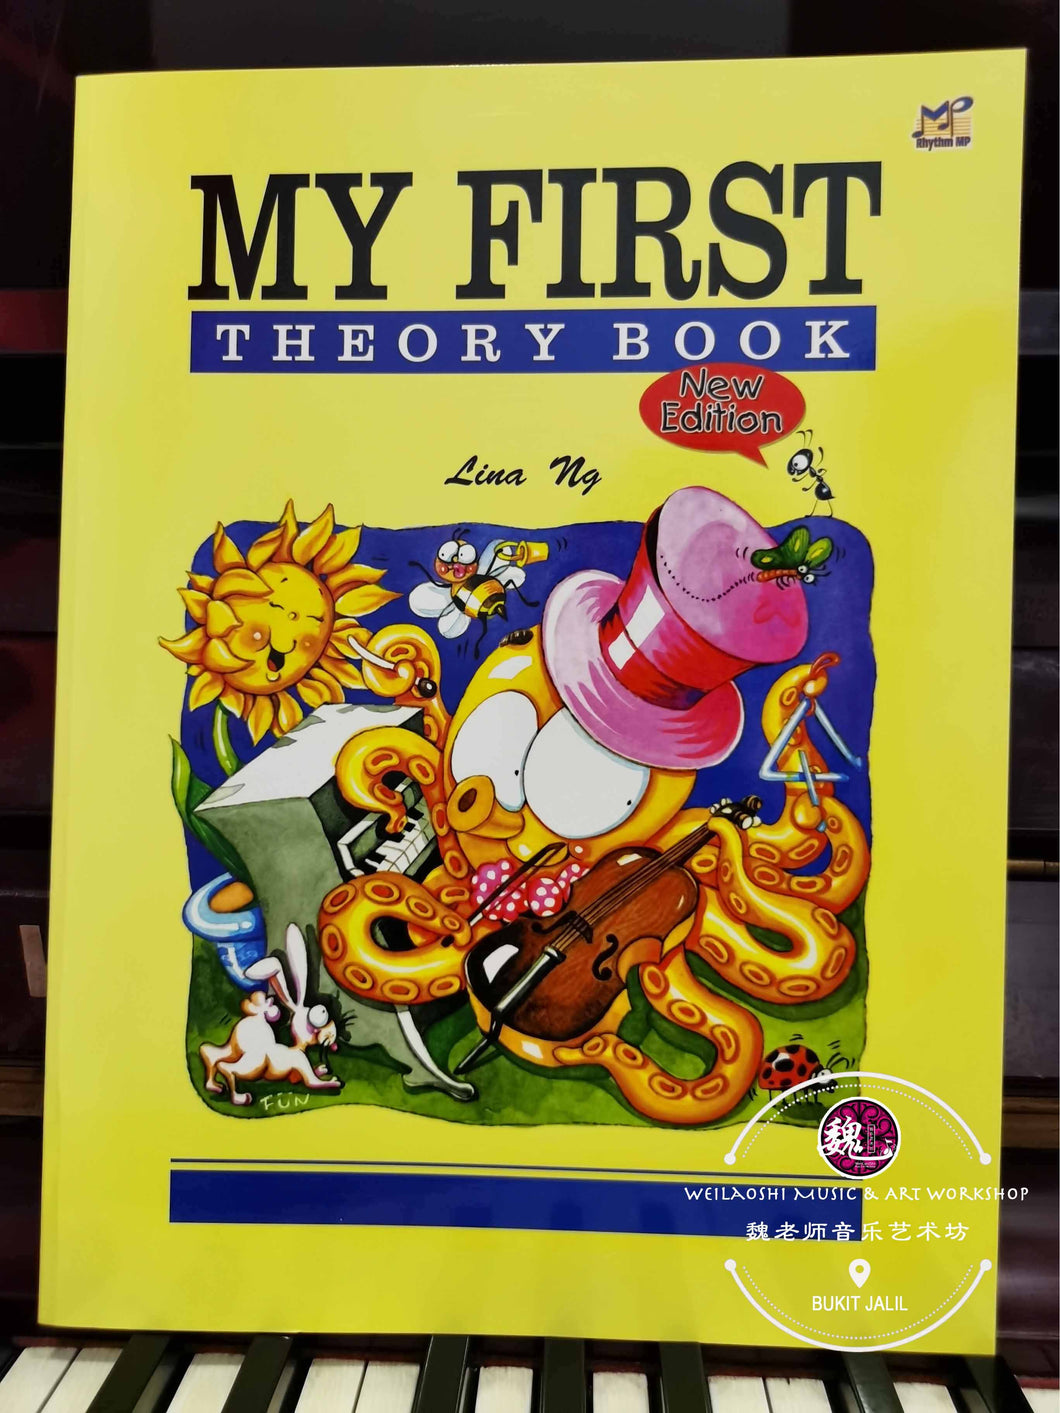 My First Theory Book New Edition by Lina Ng